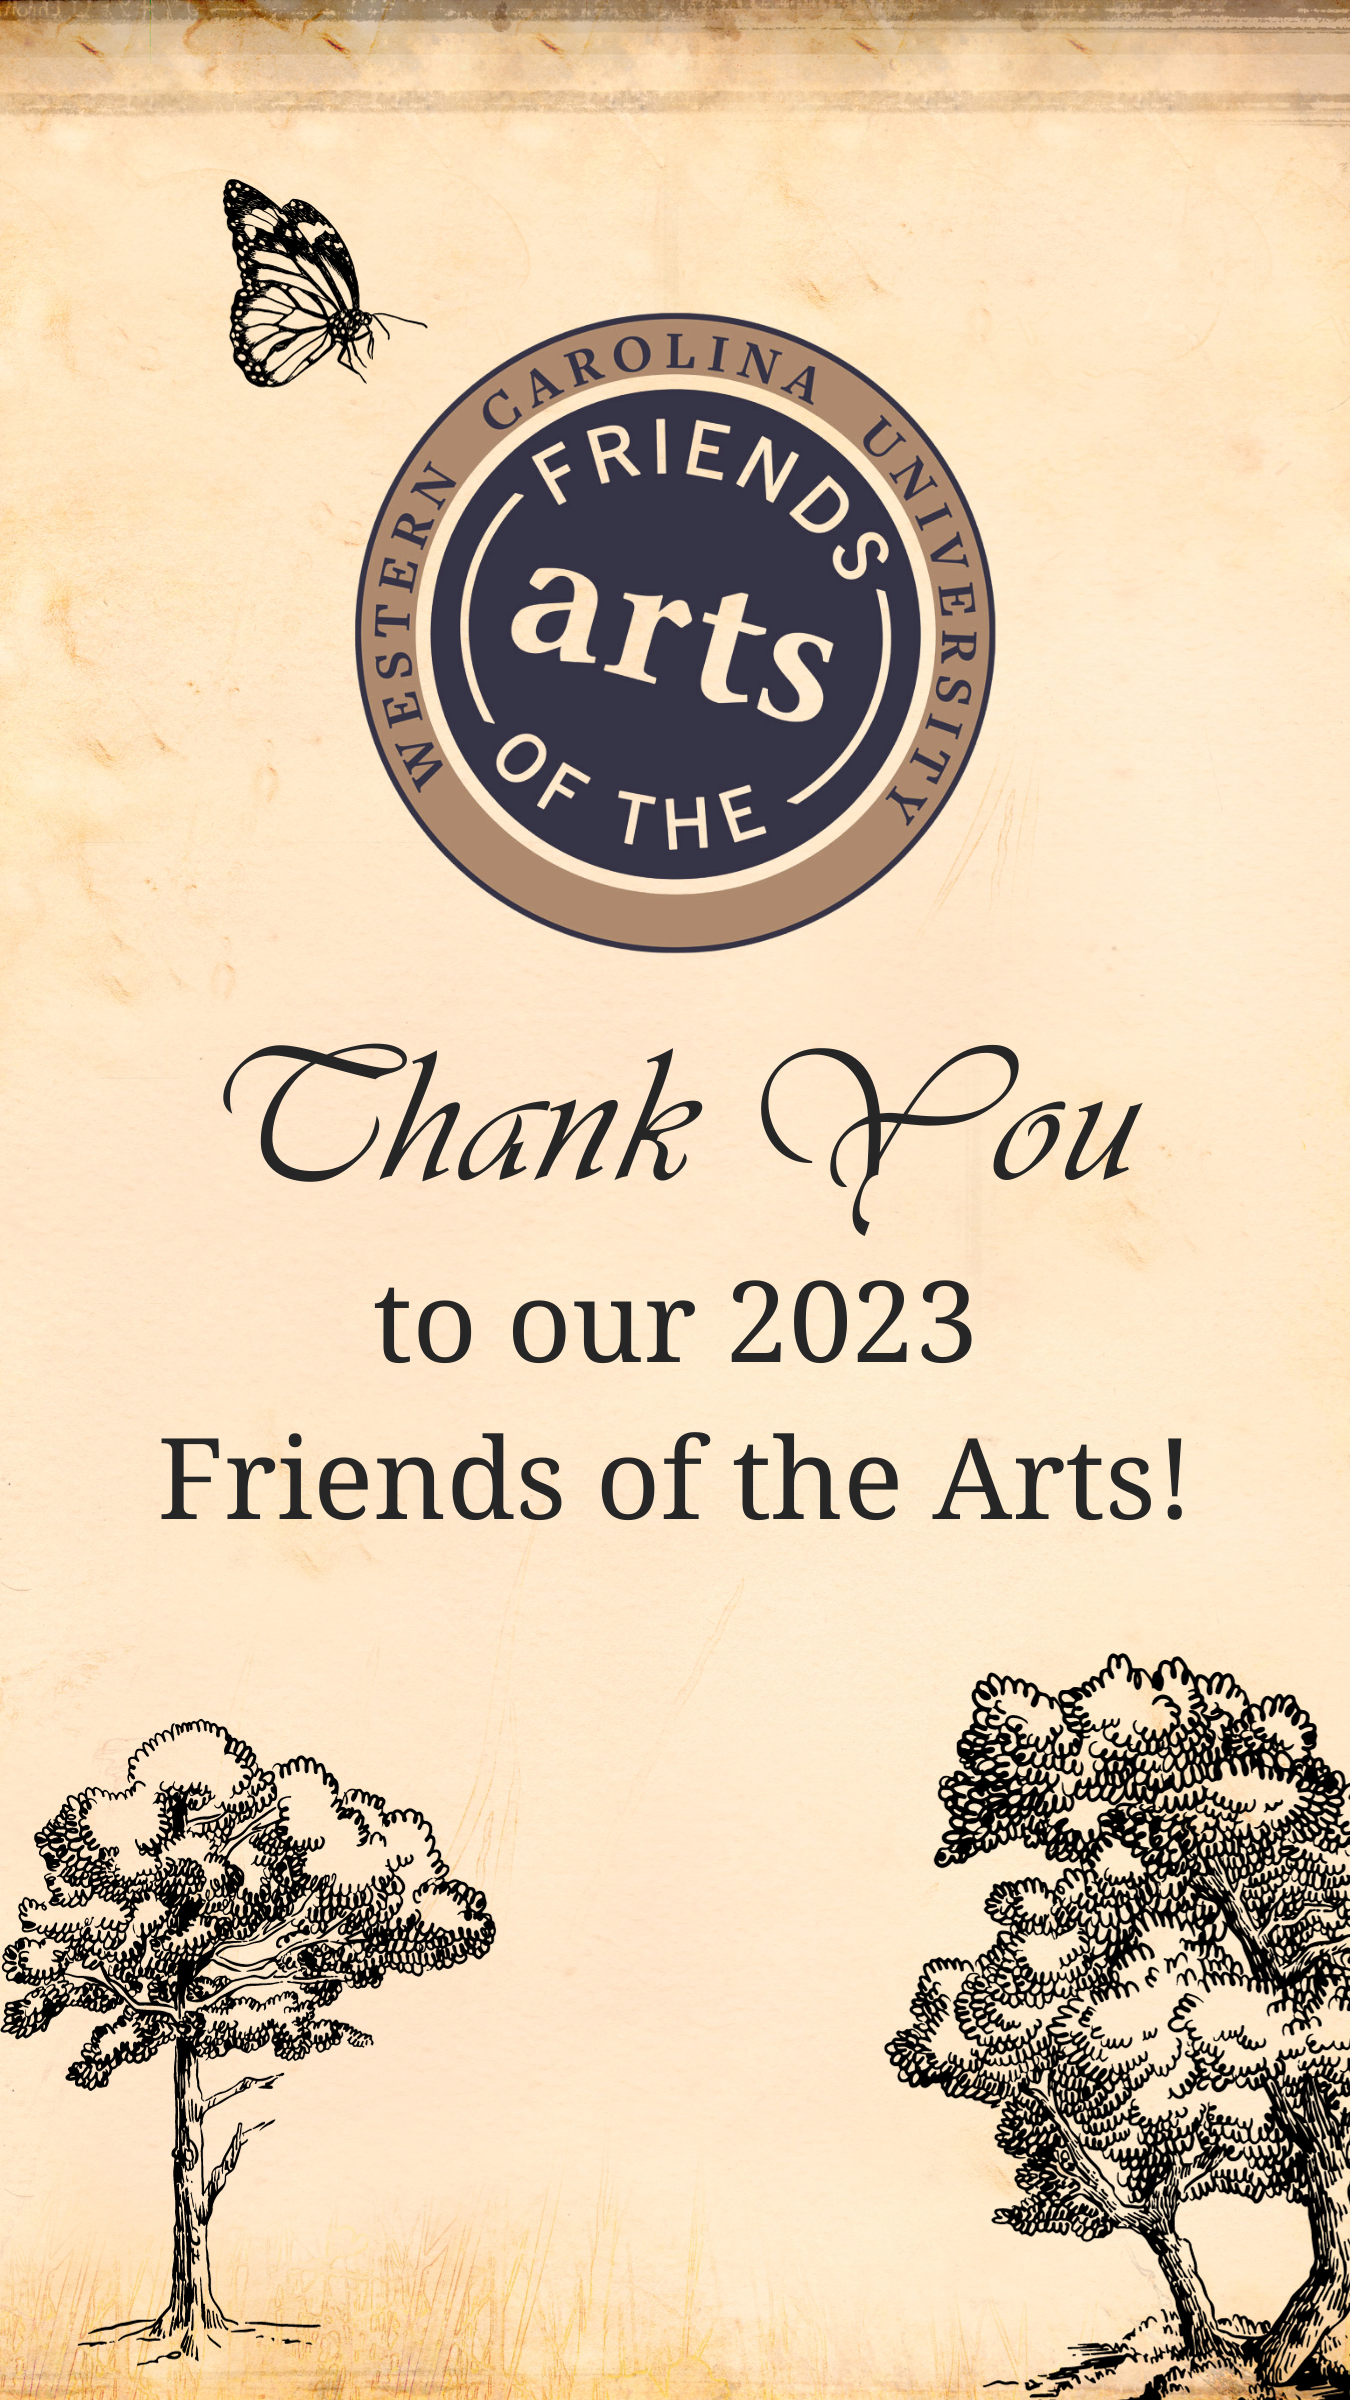 Thank you to our 2023 Friends of the Arts